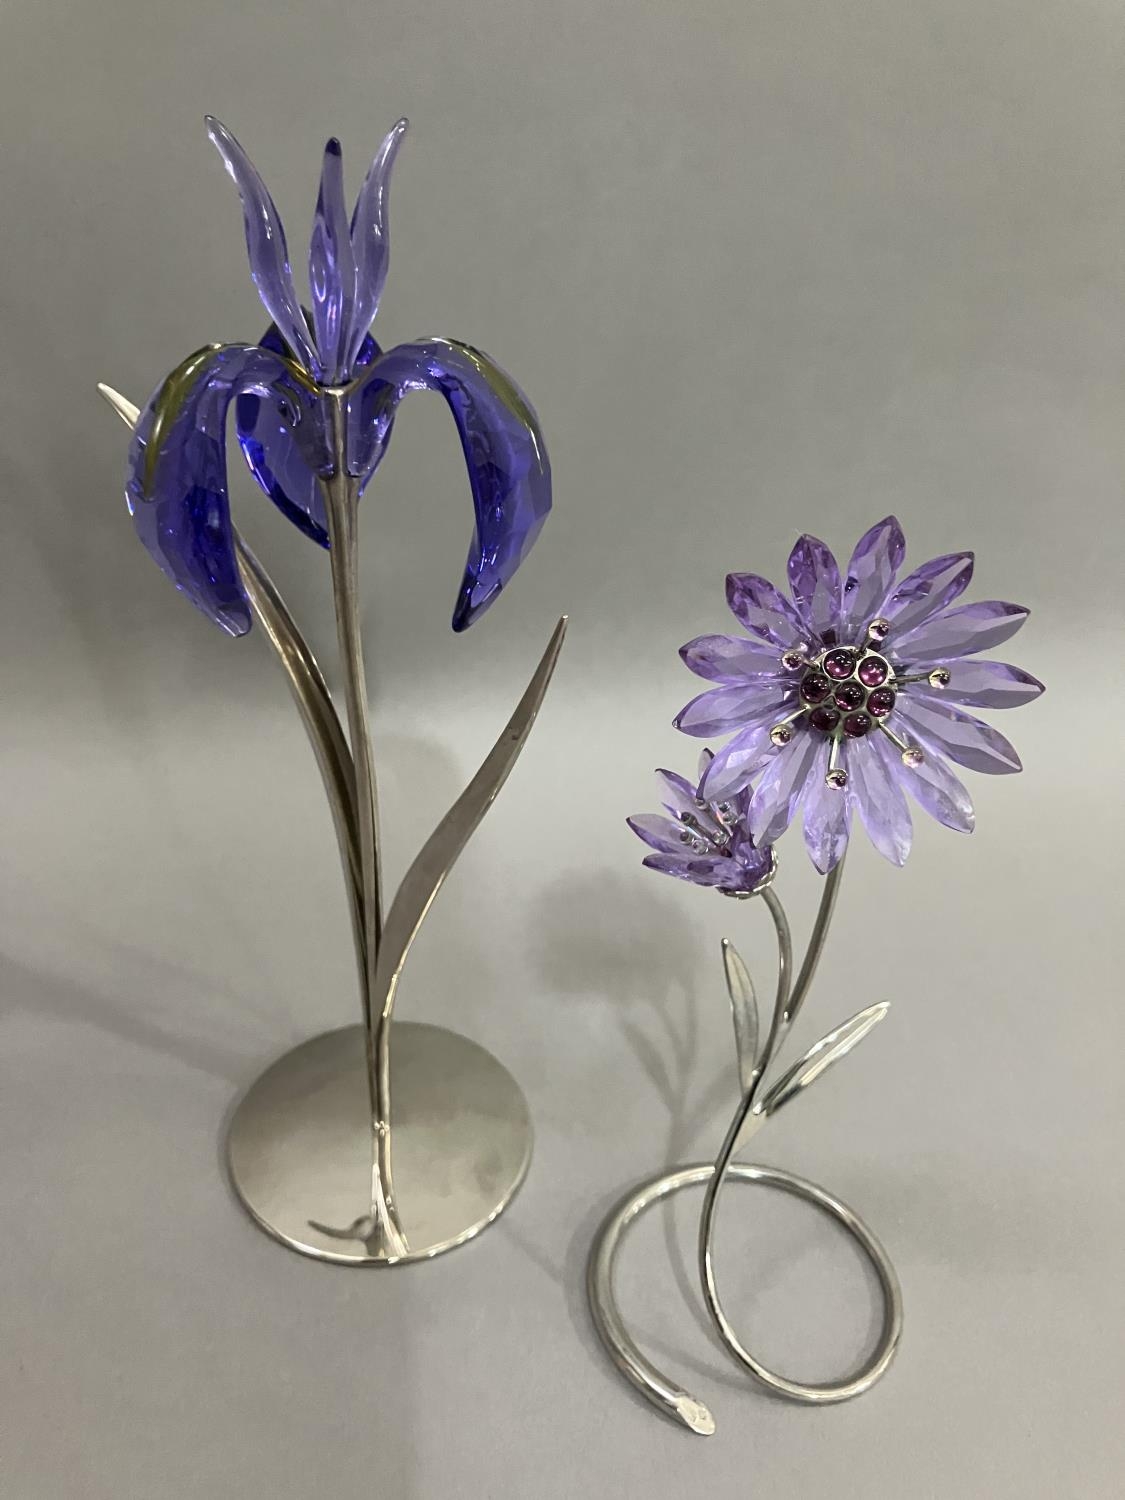 Swarovski purple iris on metal stand together with purple daisy also on metal stand - Image 2 of 2